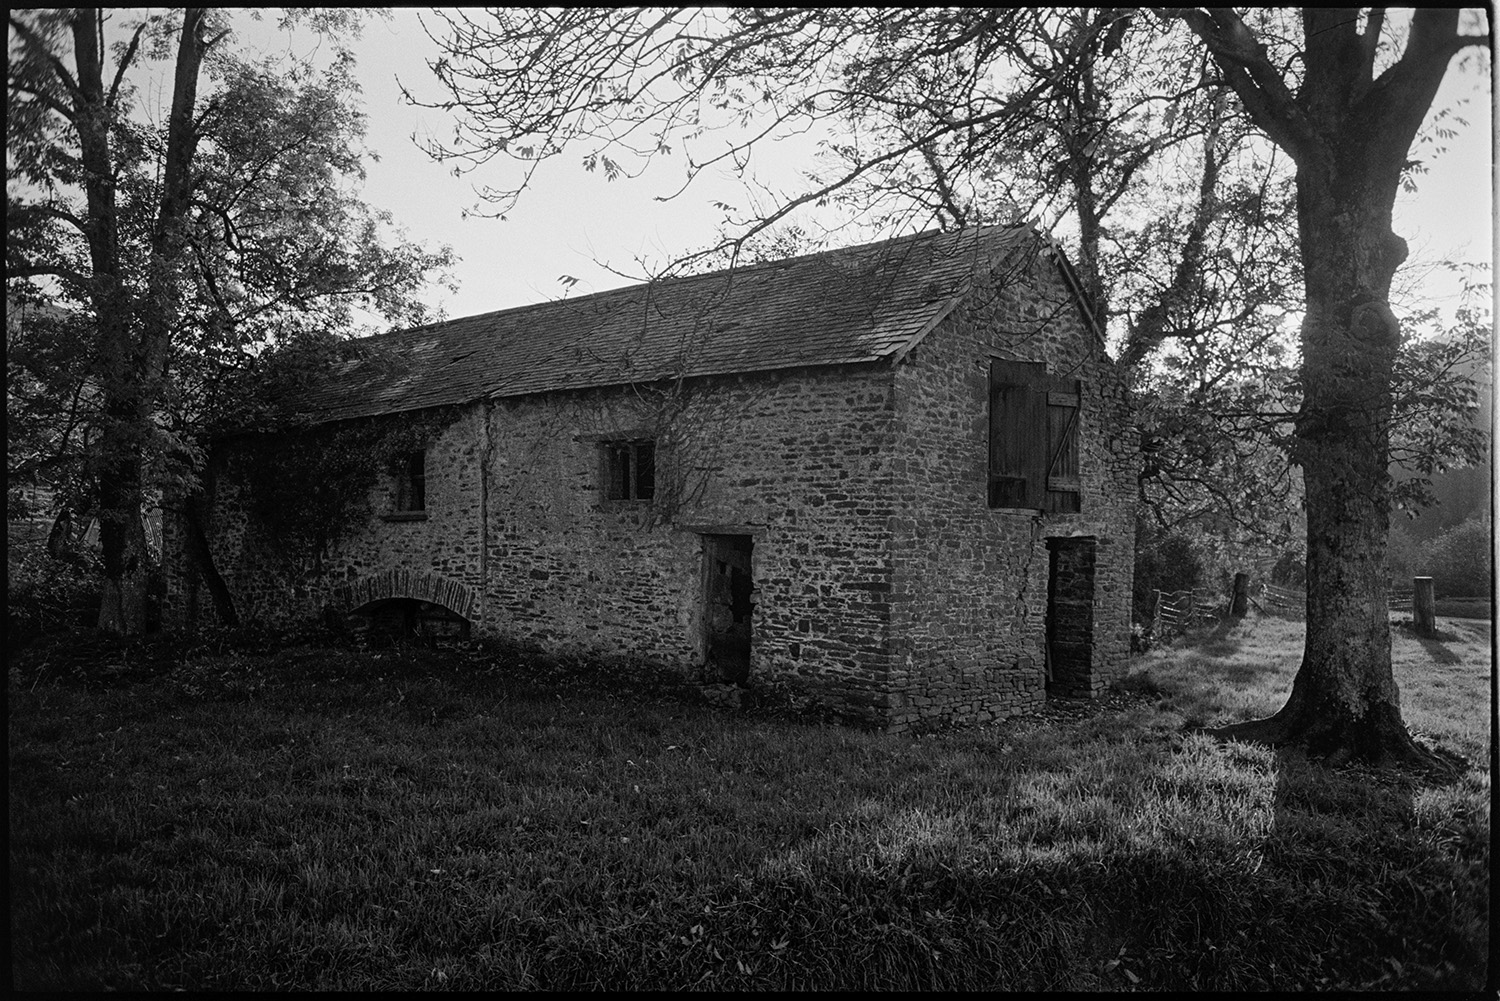 Old mill with rotting wheel stone built. 
[The stone water mill building with a tallet at Cawseys Meethe, Kings Nympton. The building is surrounded by trees.]